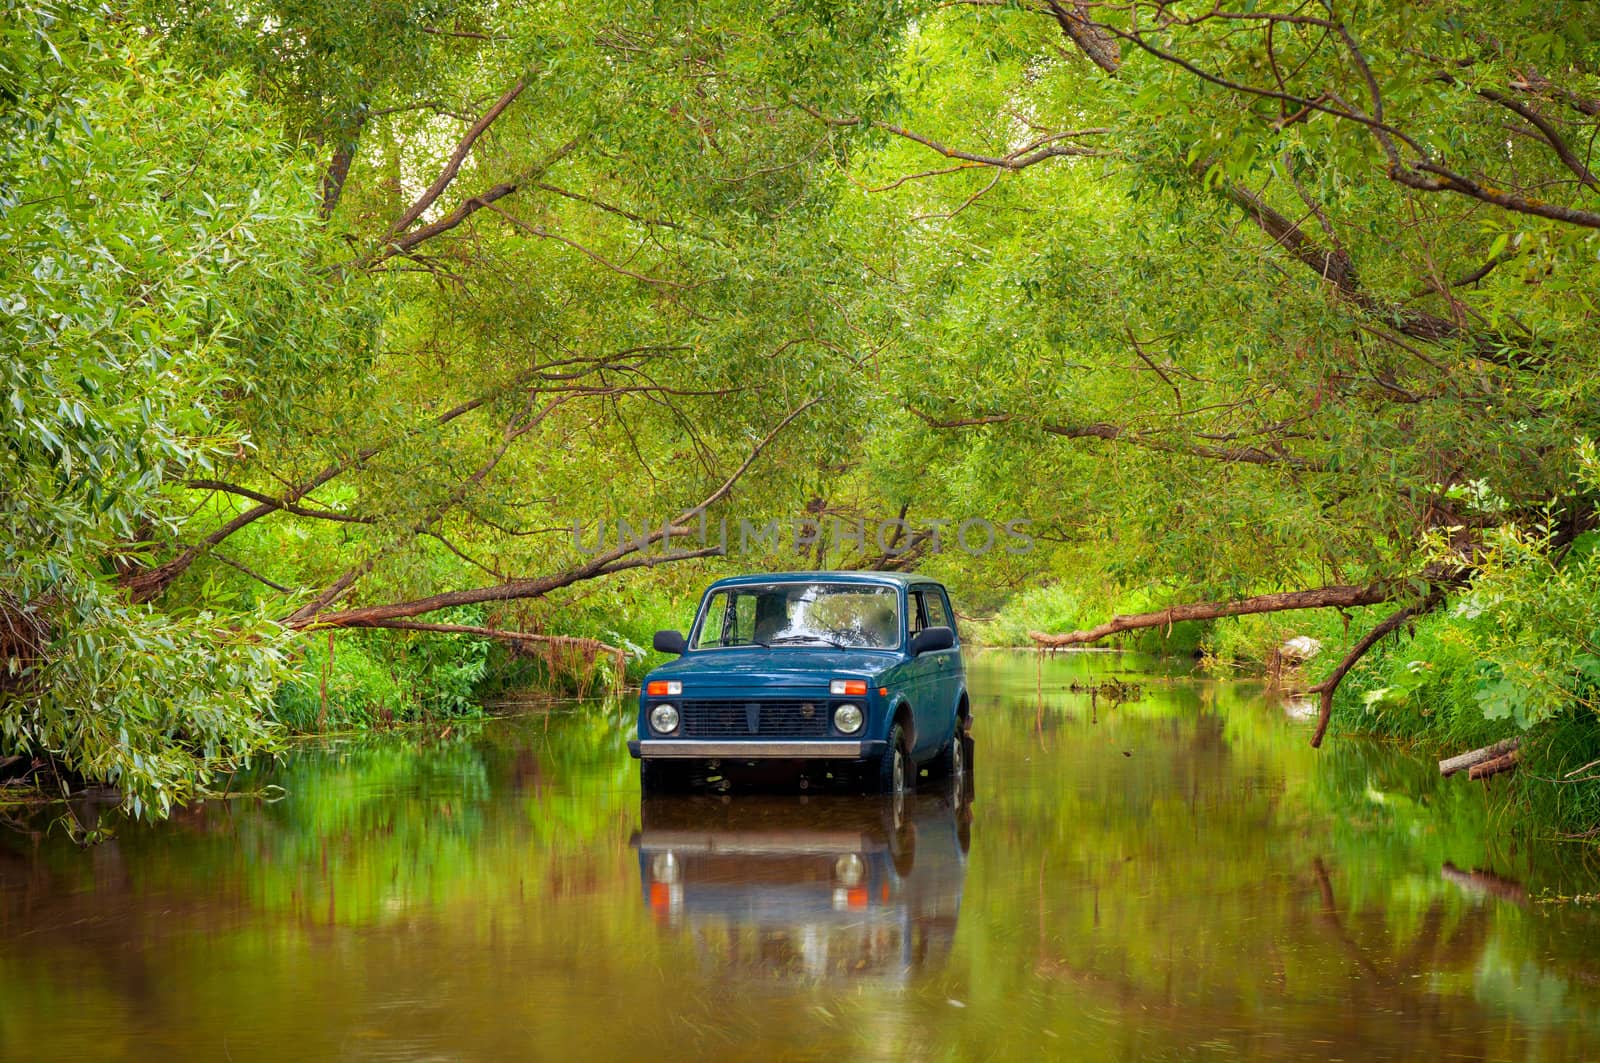 Blue car parked in water